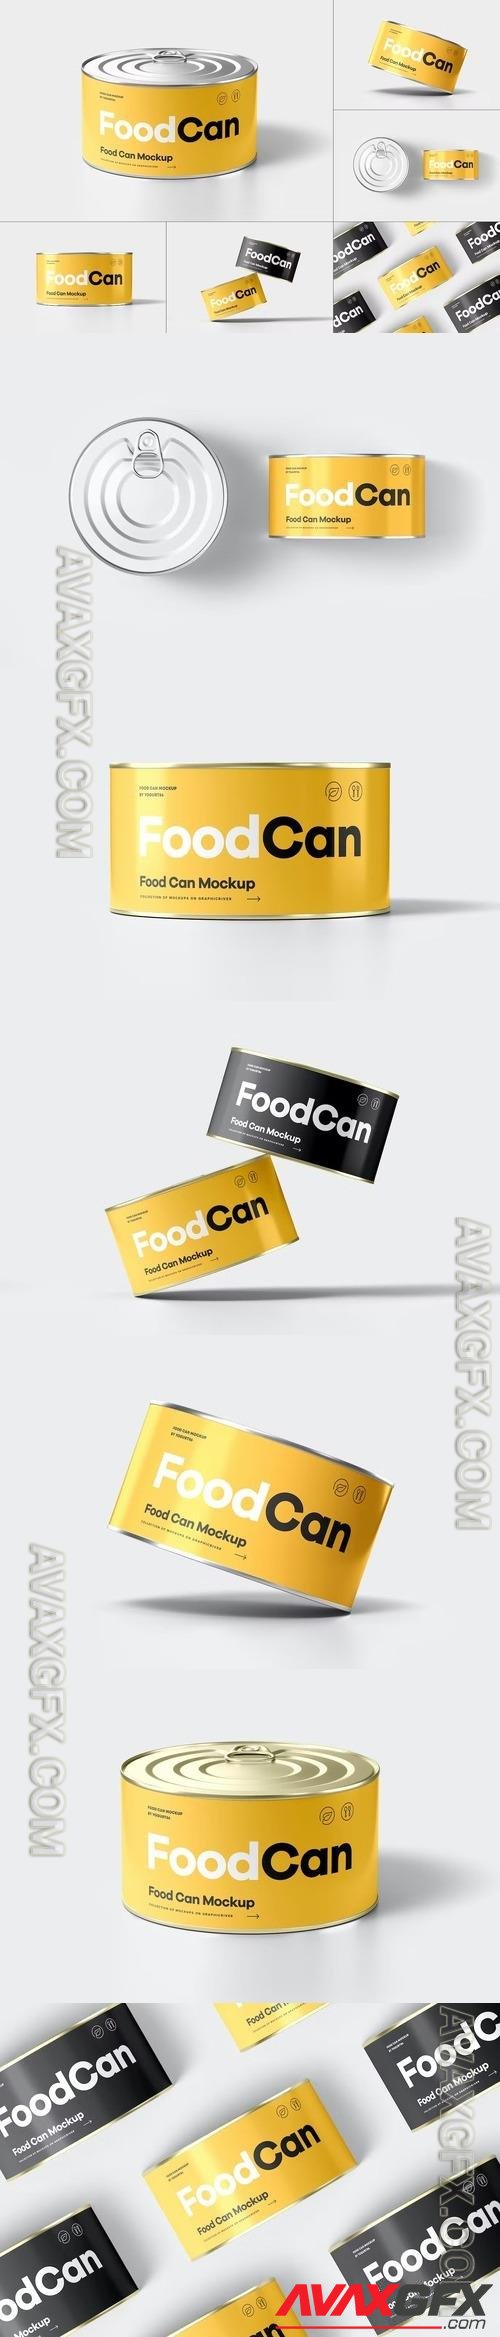 Food Can Mock-up 2